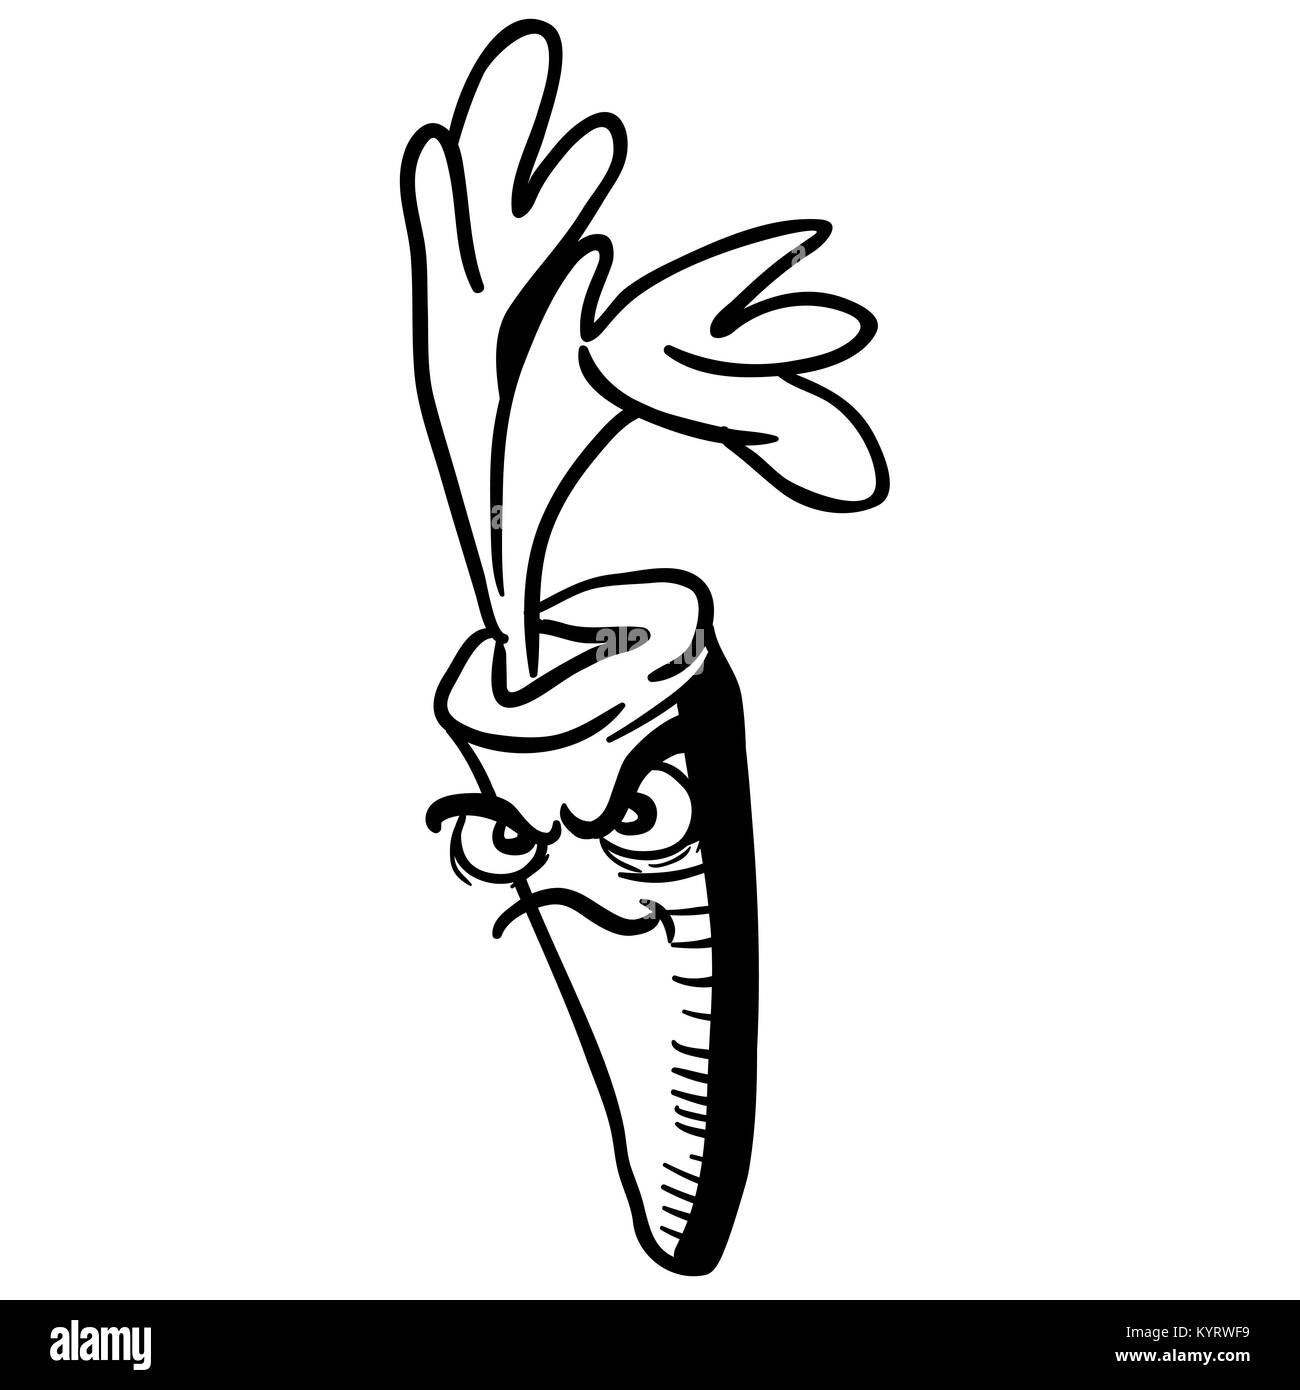 black and white angry carrot cartoon illustration isolated on white Stock Photo